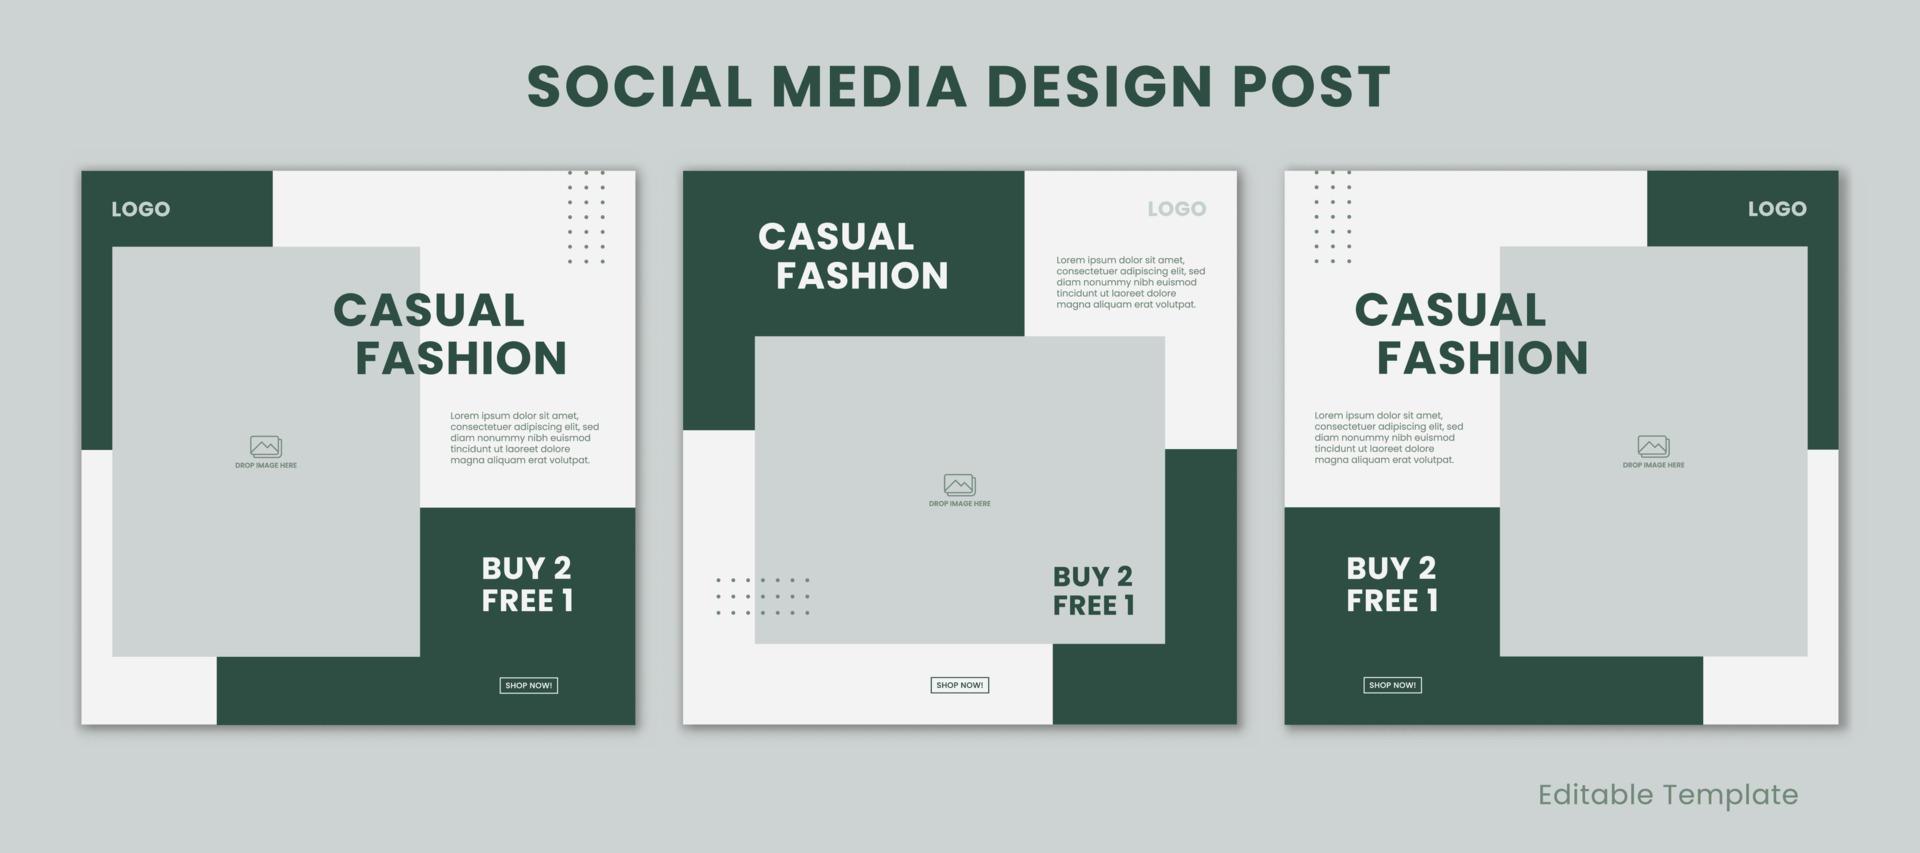 Set of 3 Editable Templates Social Media Design Post with Minimalist and Modern Style Green Color Theme. Suitable for Sale Banner, Branding, Promotion, Presentation, Advertising, Fashion vector